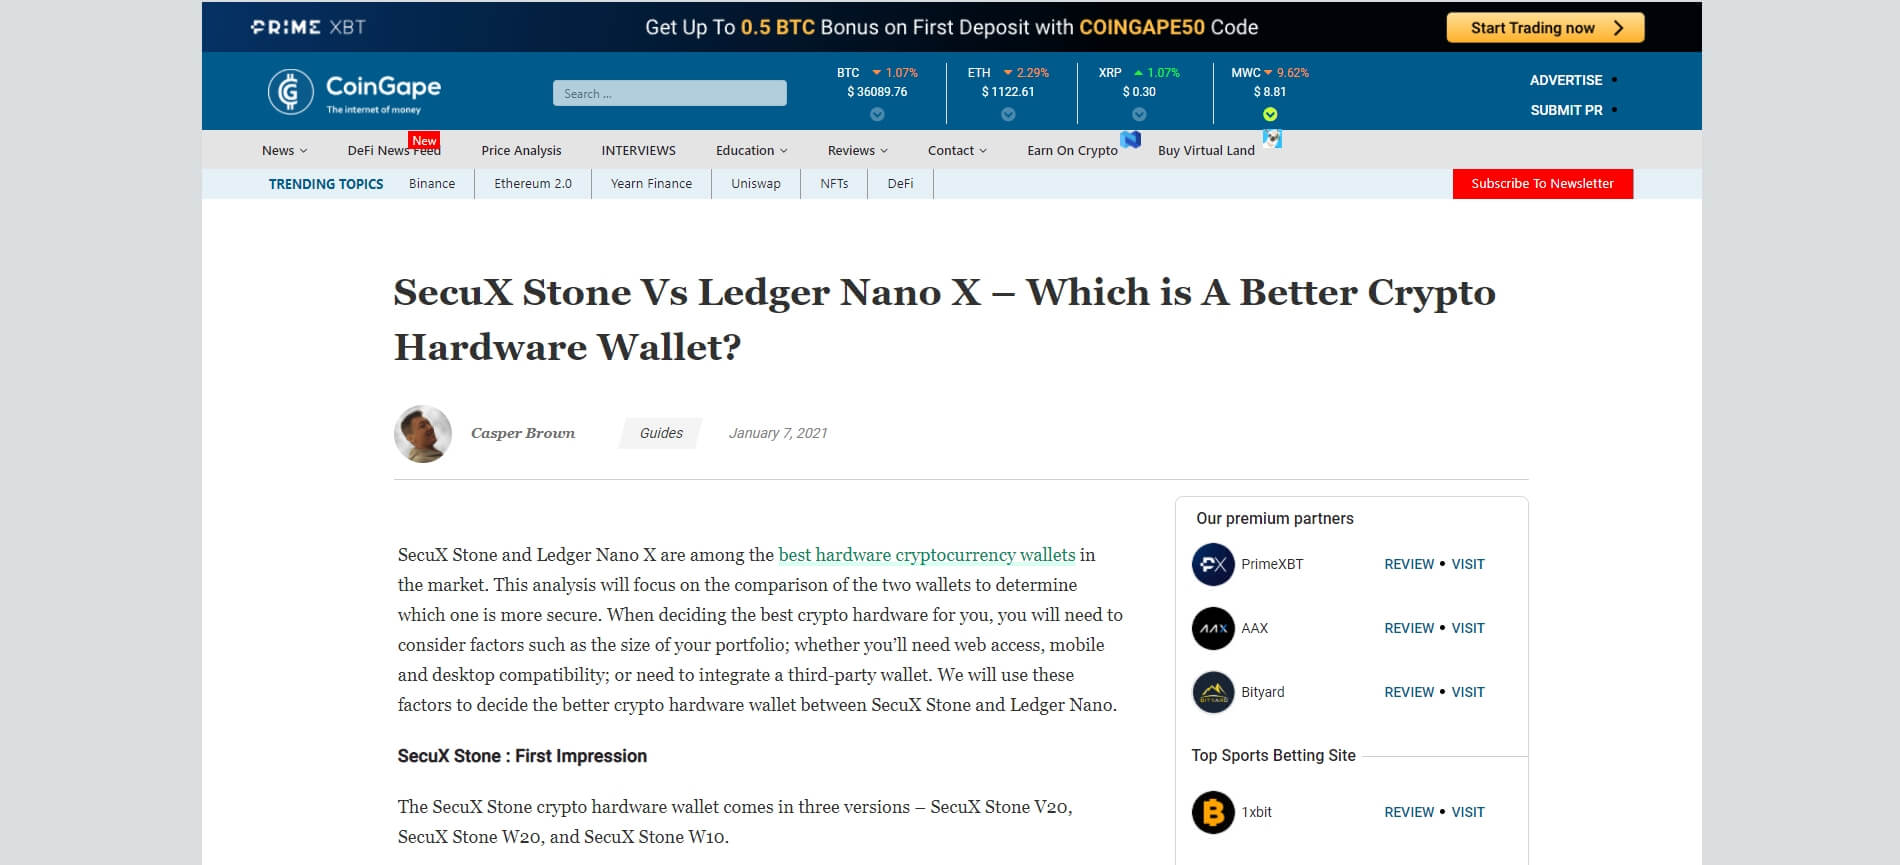 SecuX Stone Vs Ledger Nano X – Which is A Better Crypto Hardware Wallet